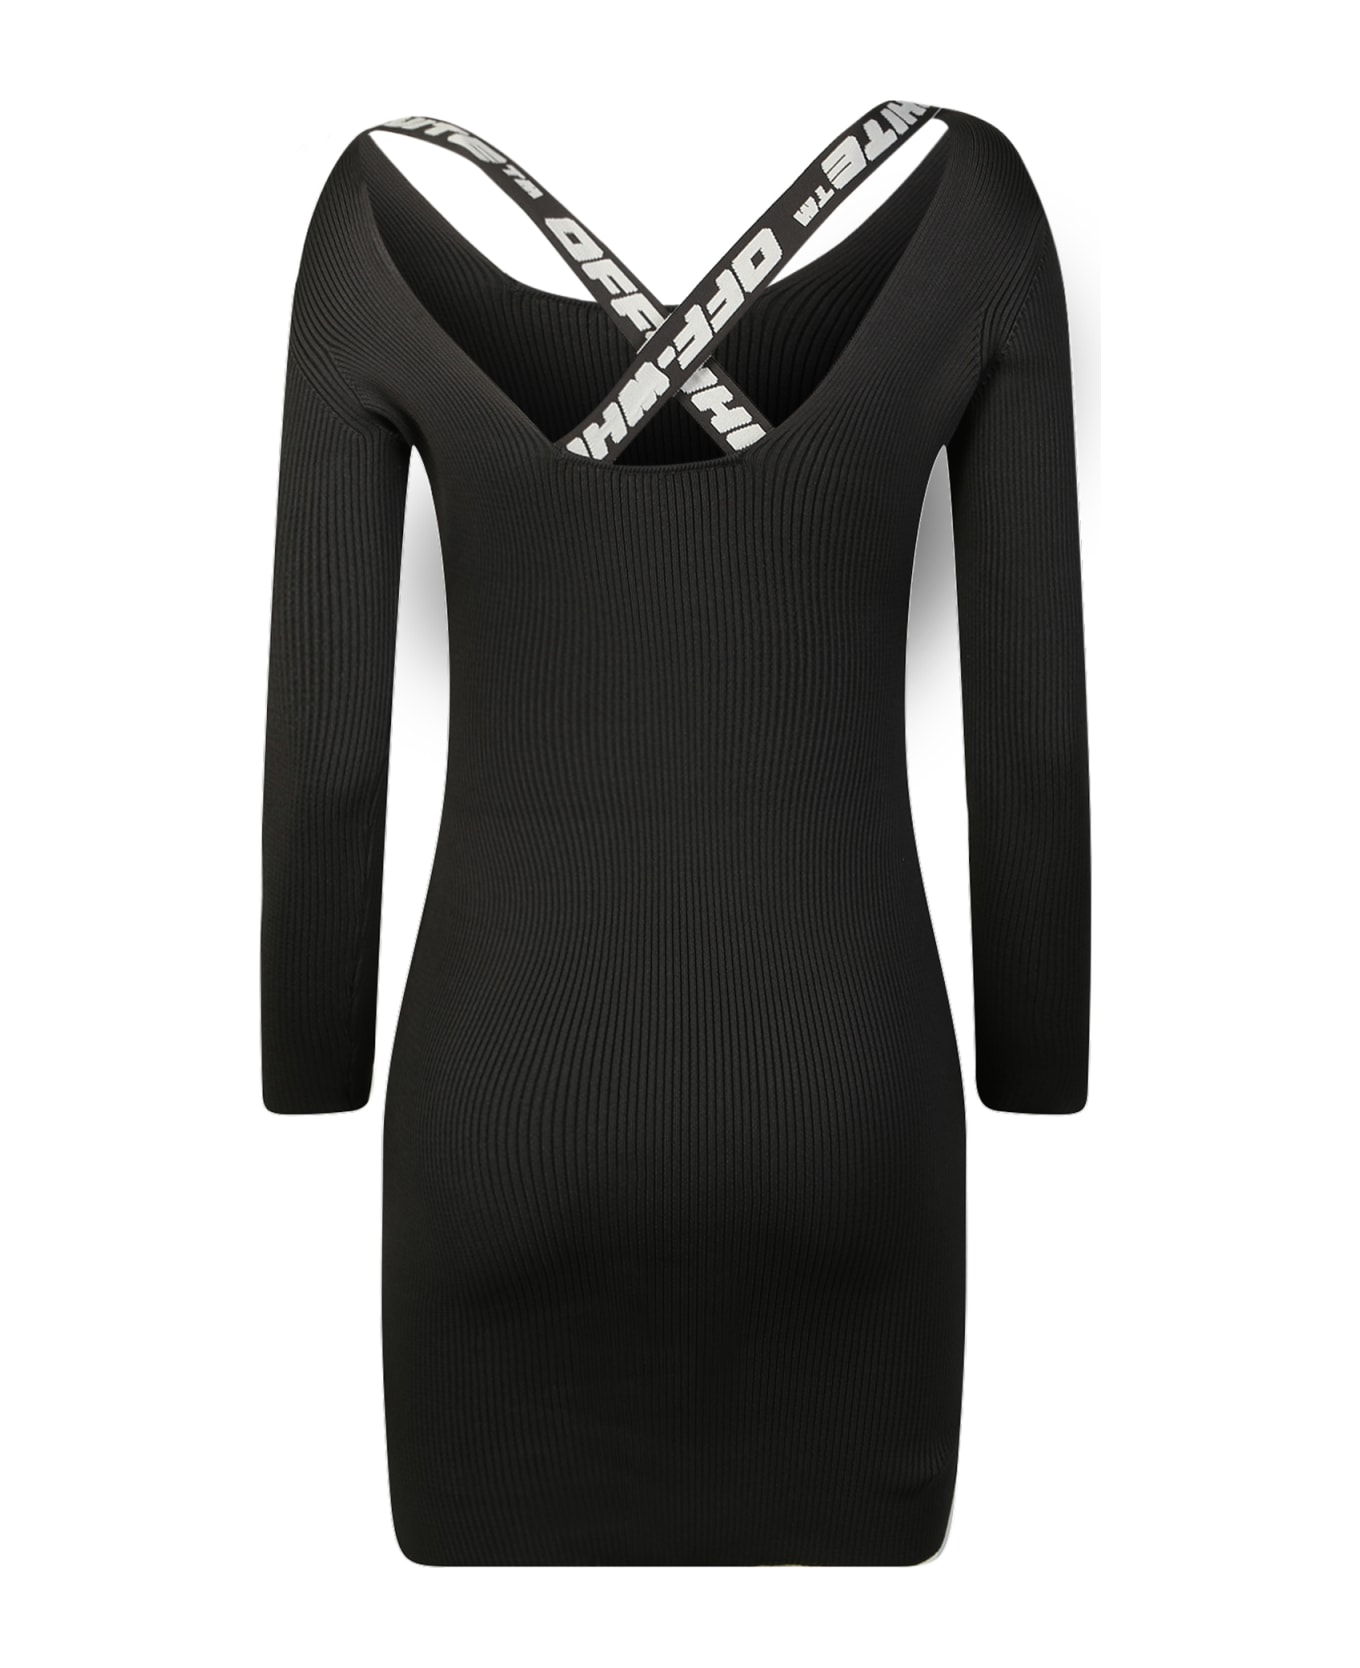 Off-White Ribbed Dress With Crossed Straps Detail Black - Black